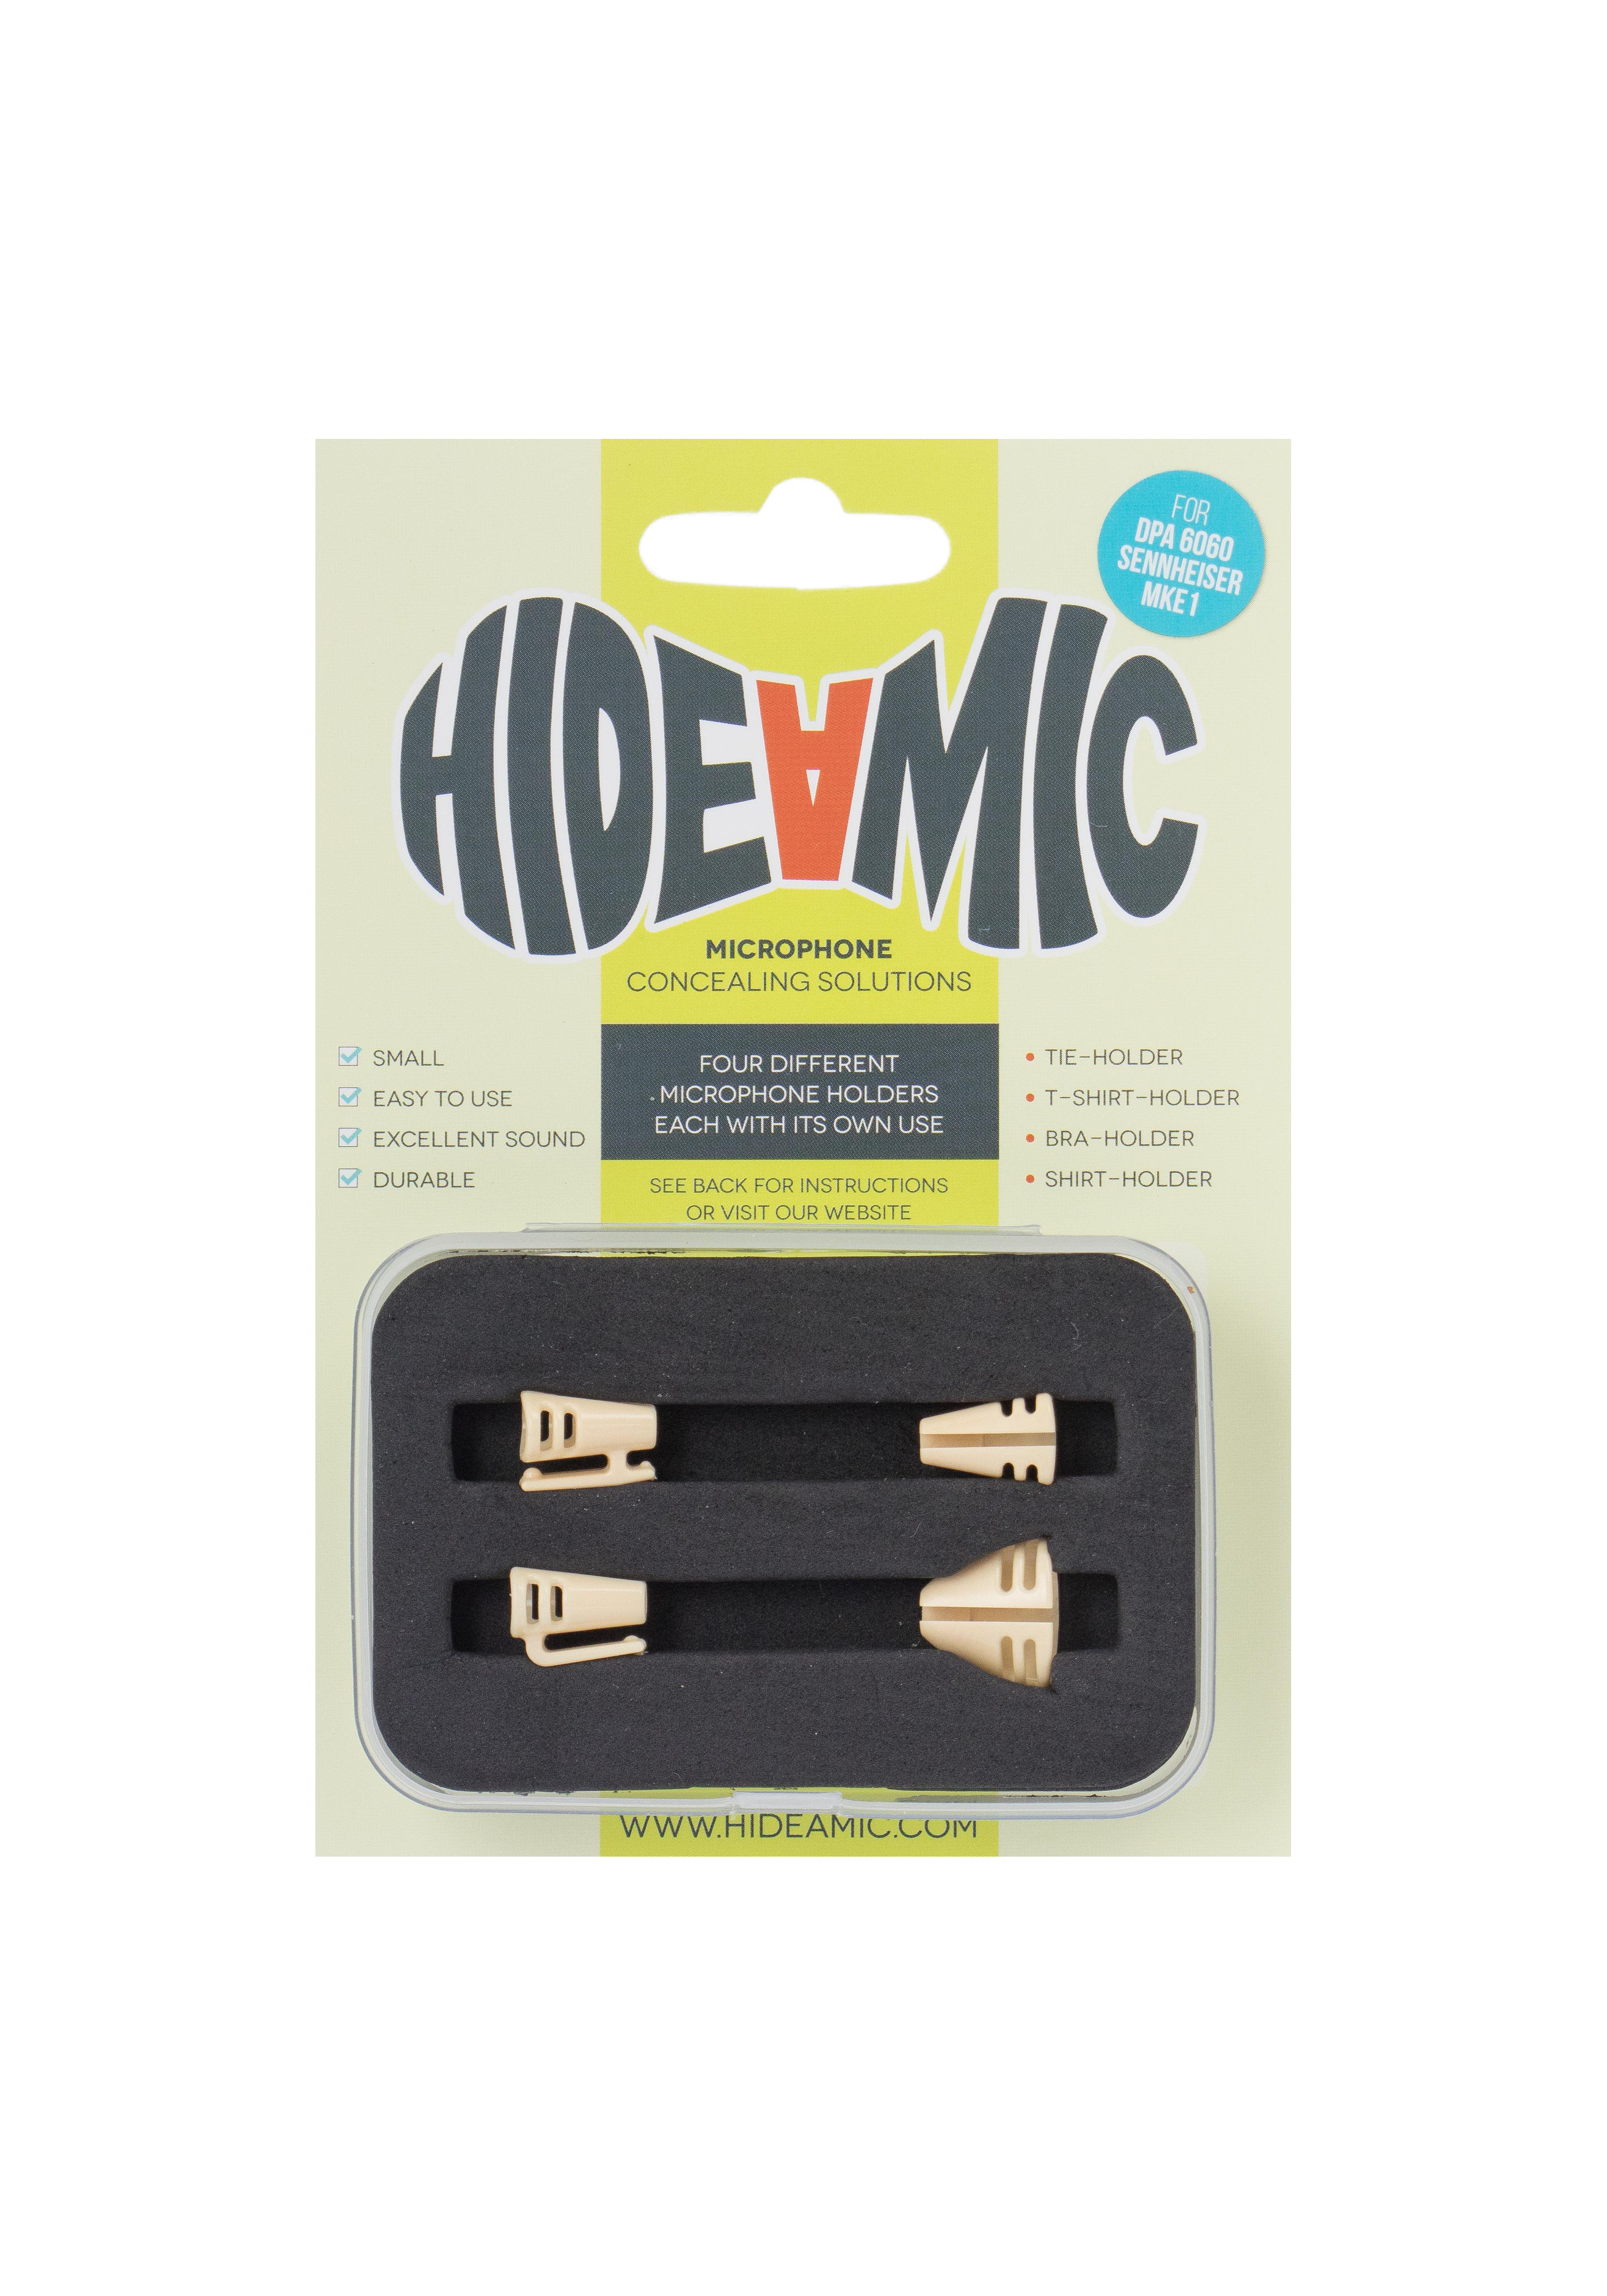 Hideamic Microphone Concealing Solutions